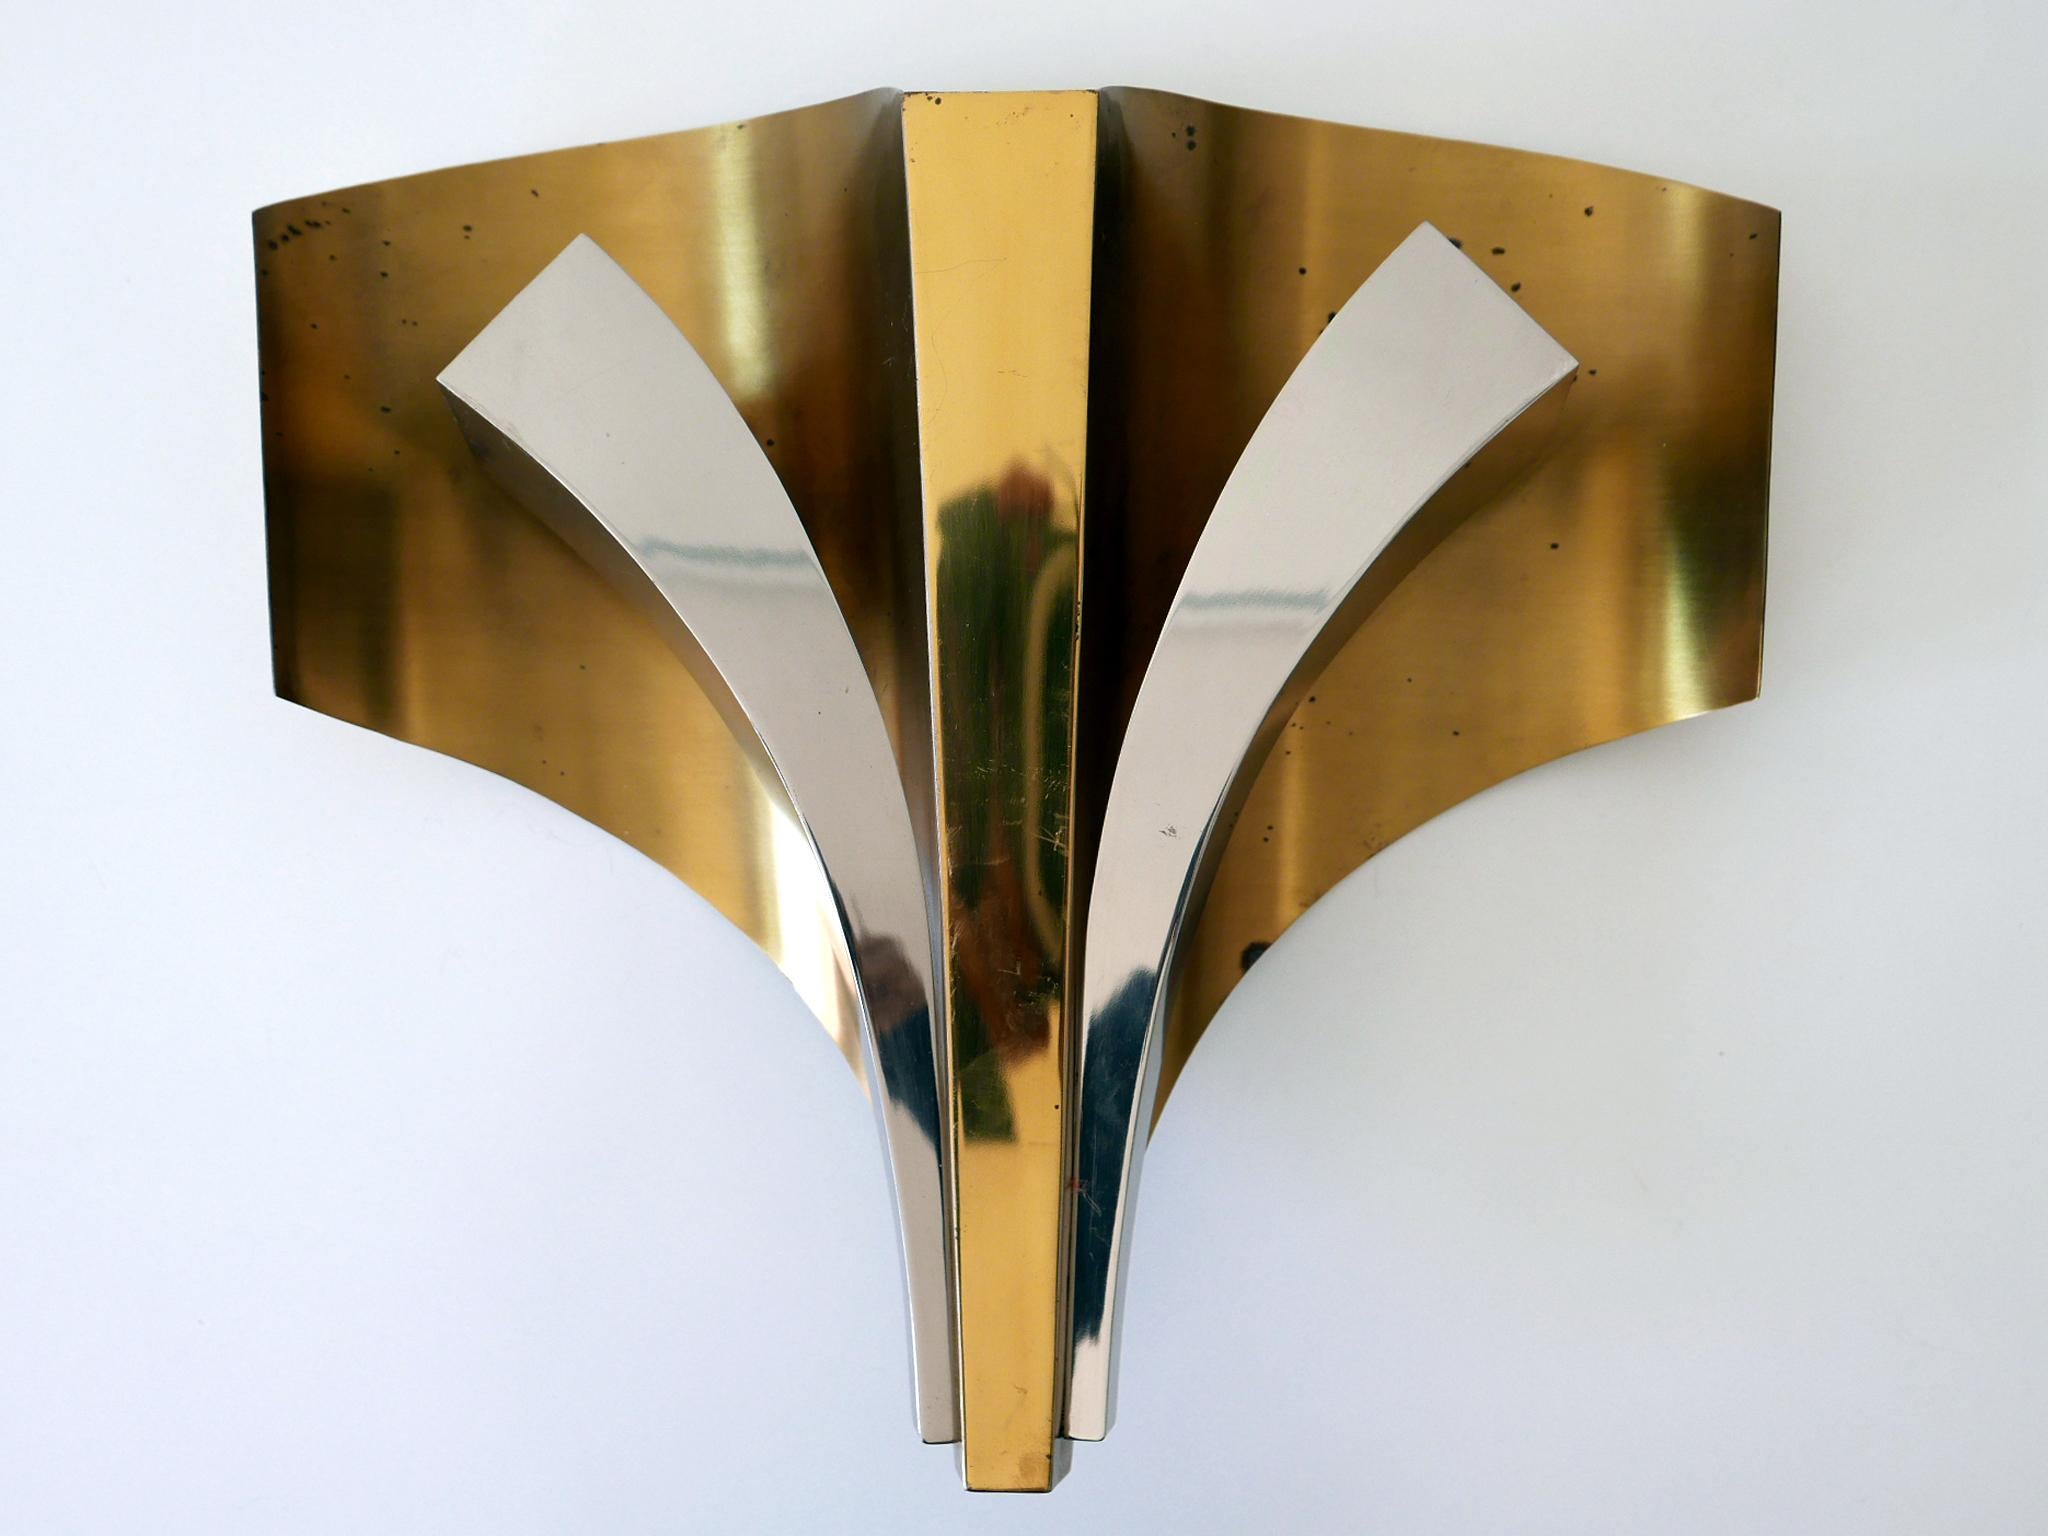 French Set of Two Large Mid-Century Modern Brass Sconces by Maison Baguès Paris 1960s For Sale